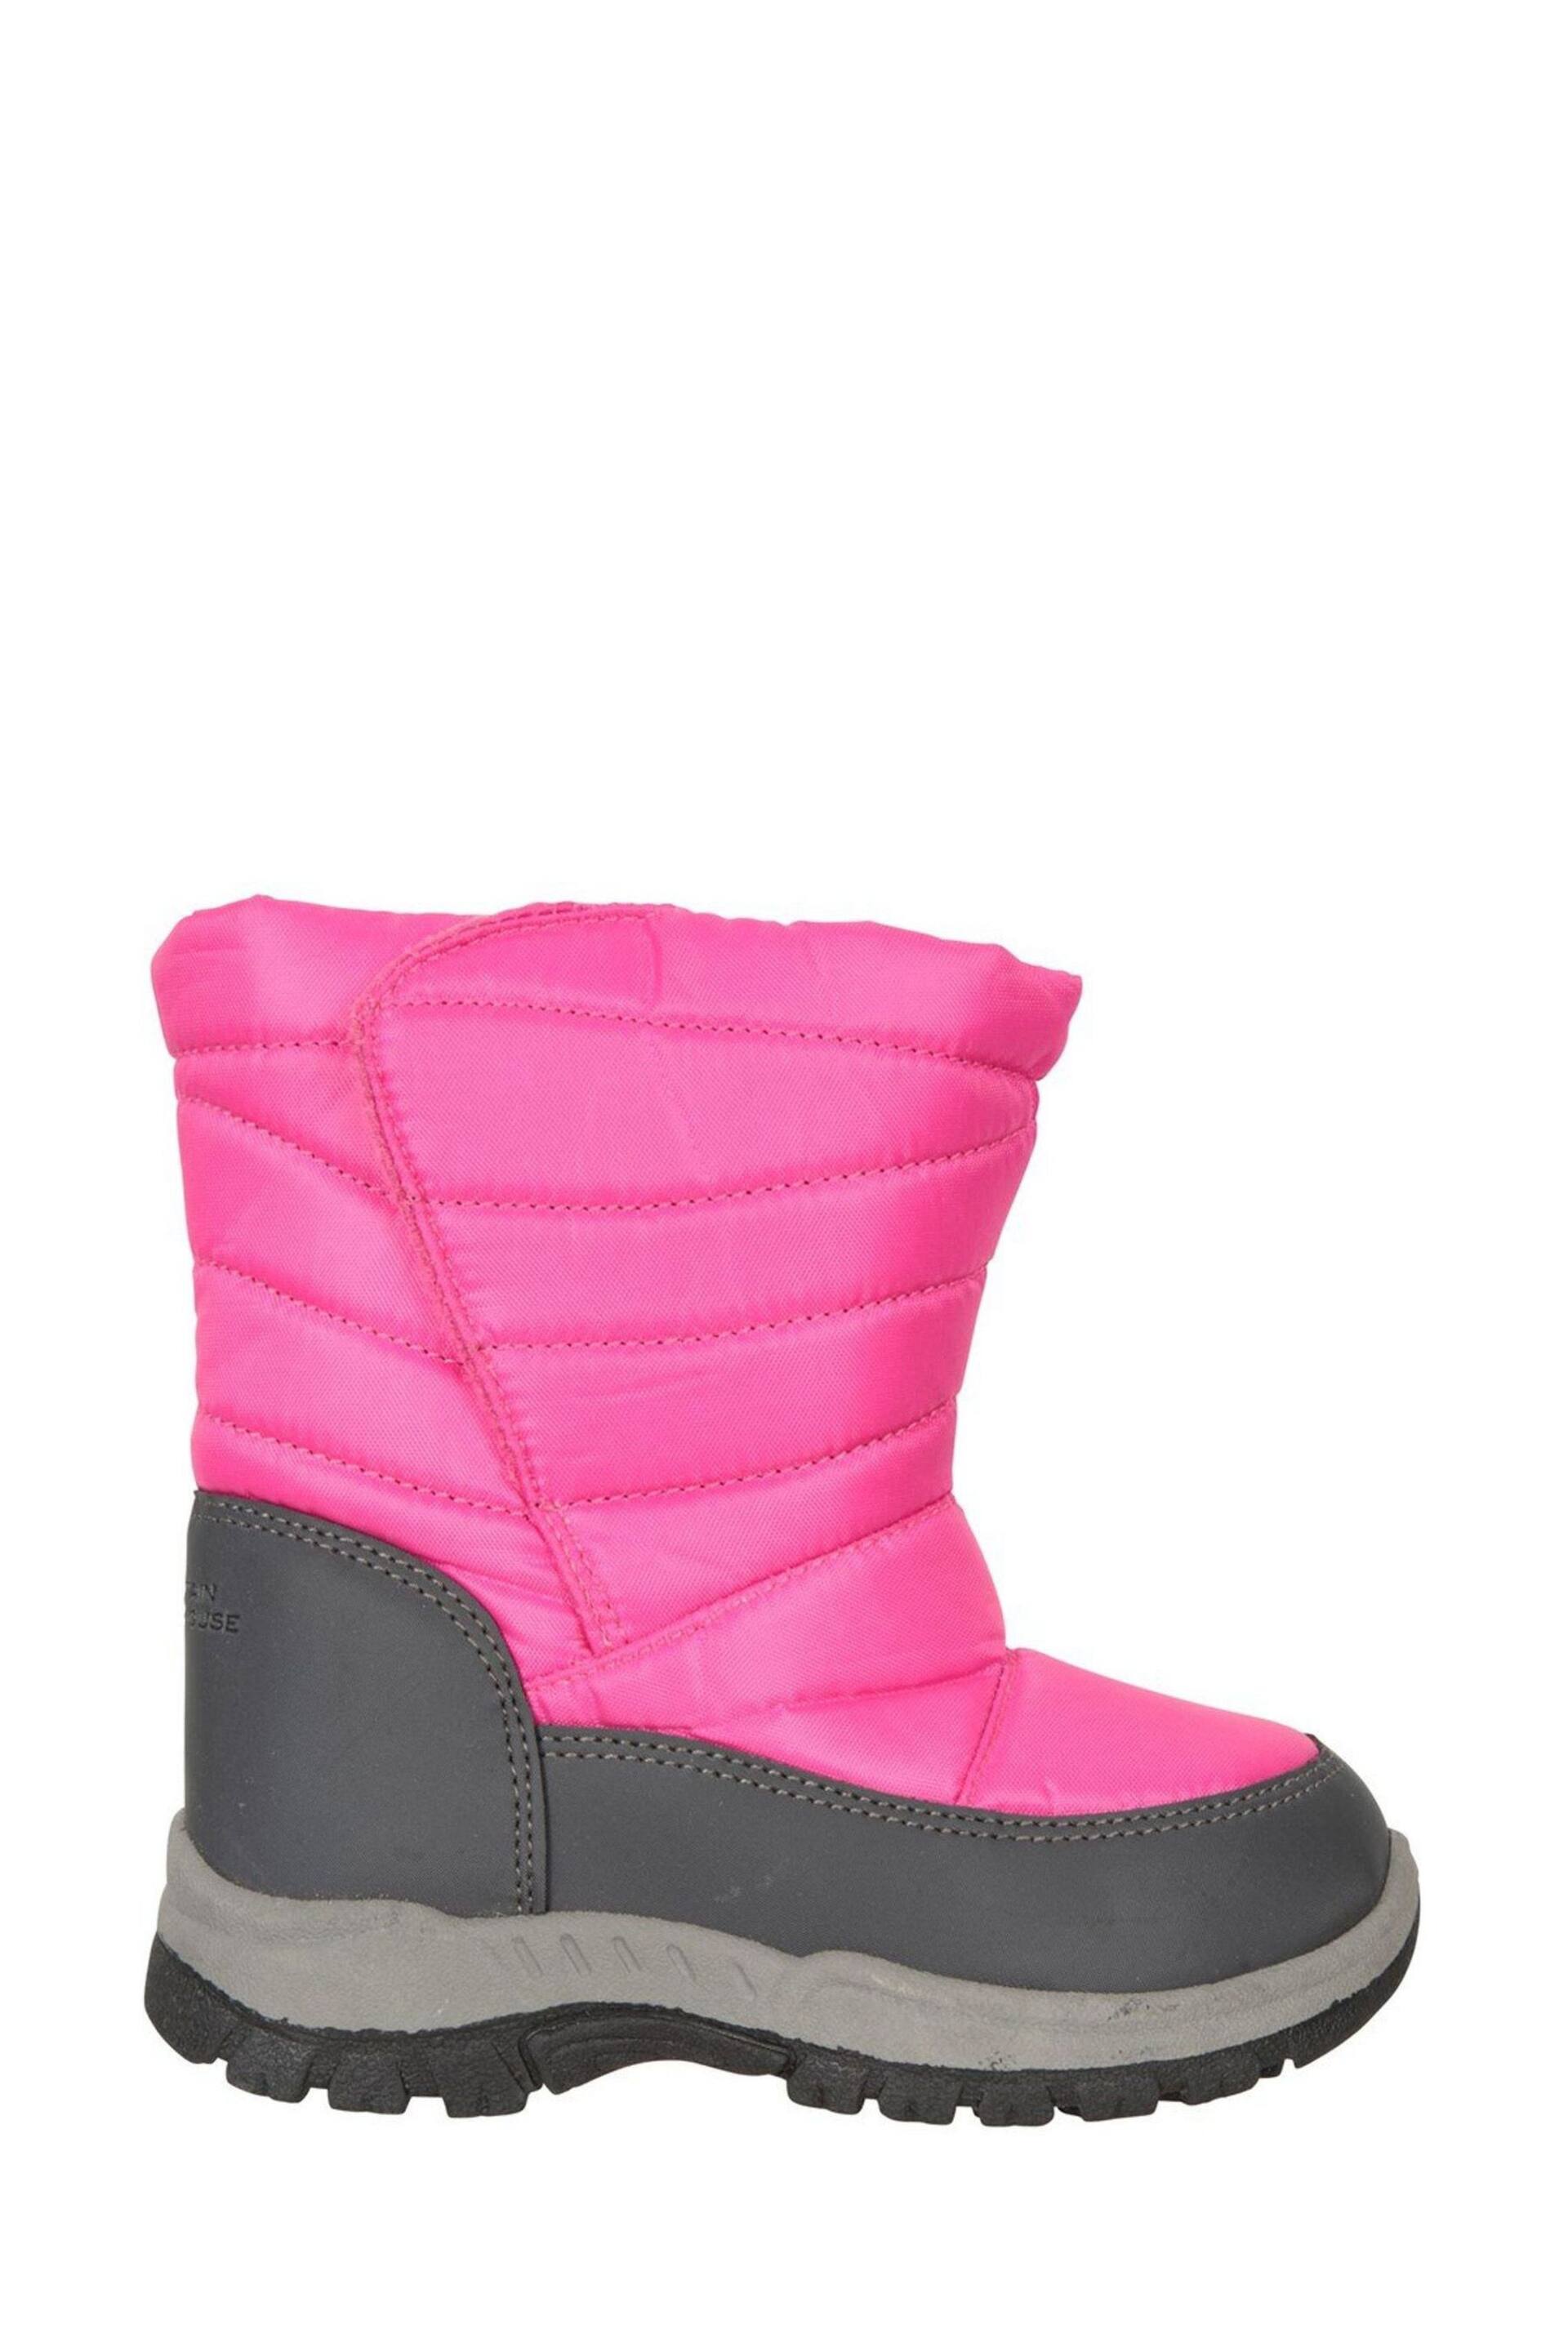 Mountain Warehouse Pink Caribou Insulated Snow Boots - Toddler - Image 2 of 3